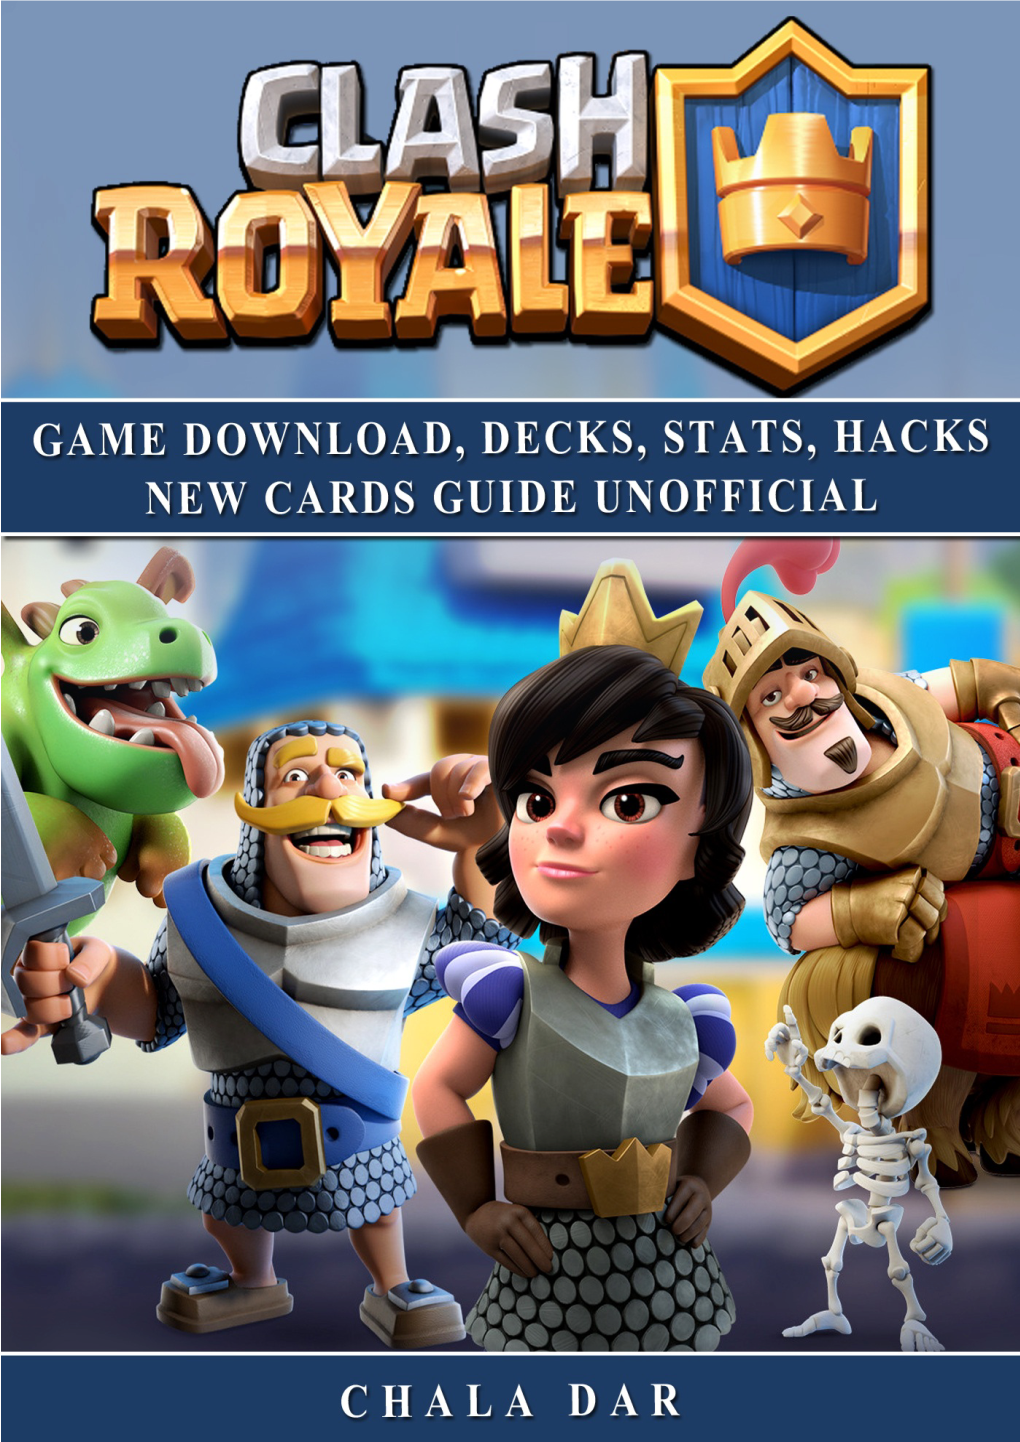 Clash Royale Game Download, Decks, Stats, Hacks New Cards Guide Unofficial